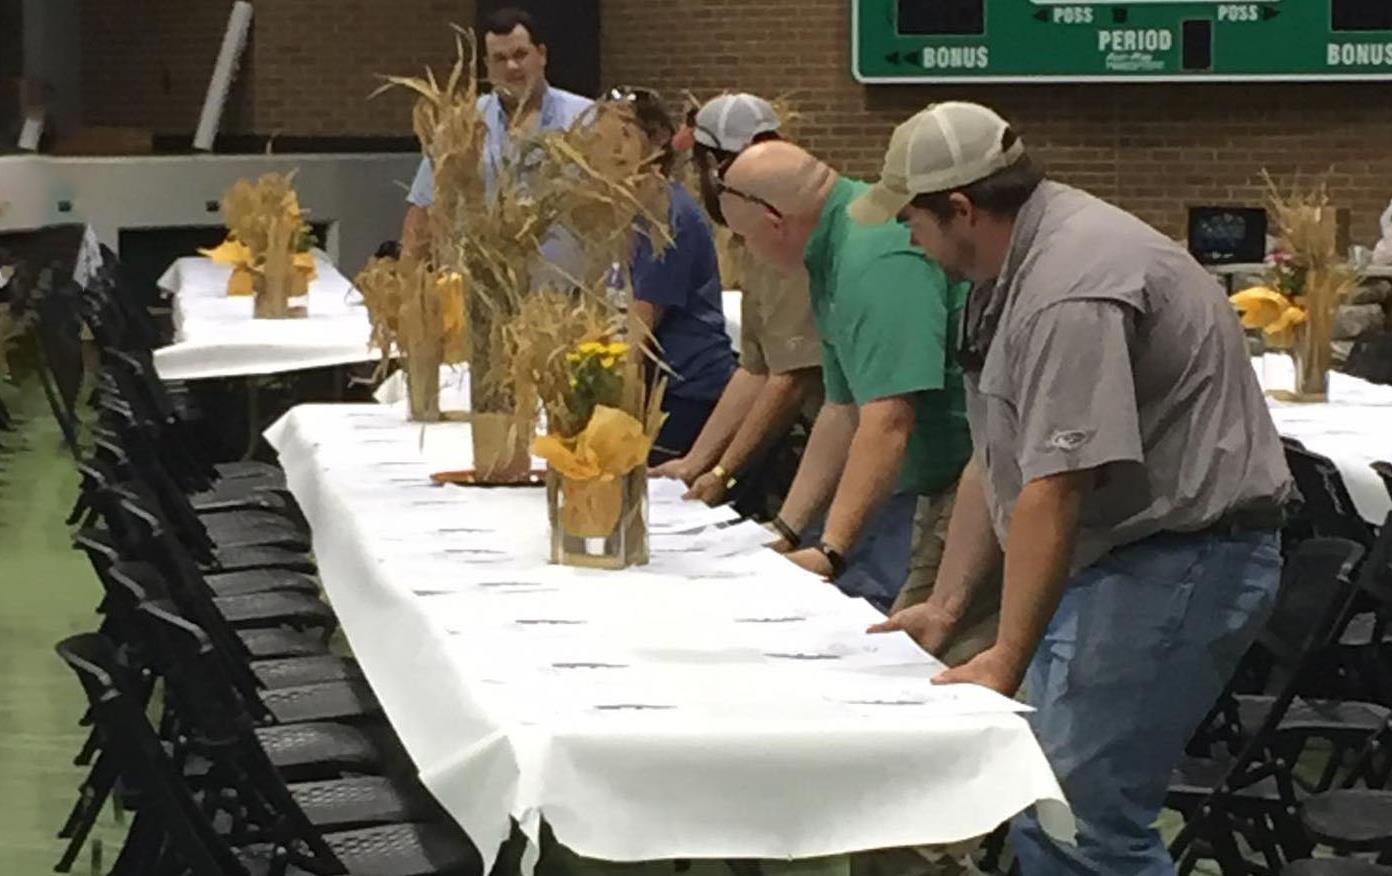 People drag tables with rice centerpieces into place at Annual MS Rice Tasting Luncheon